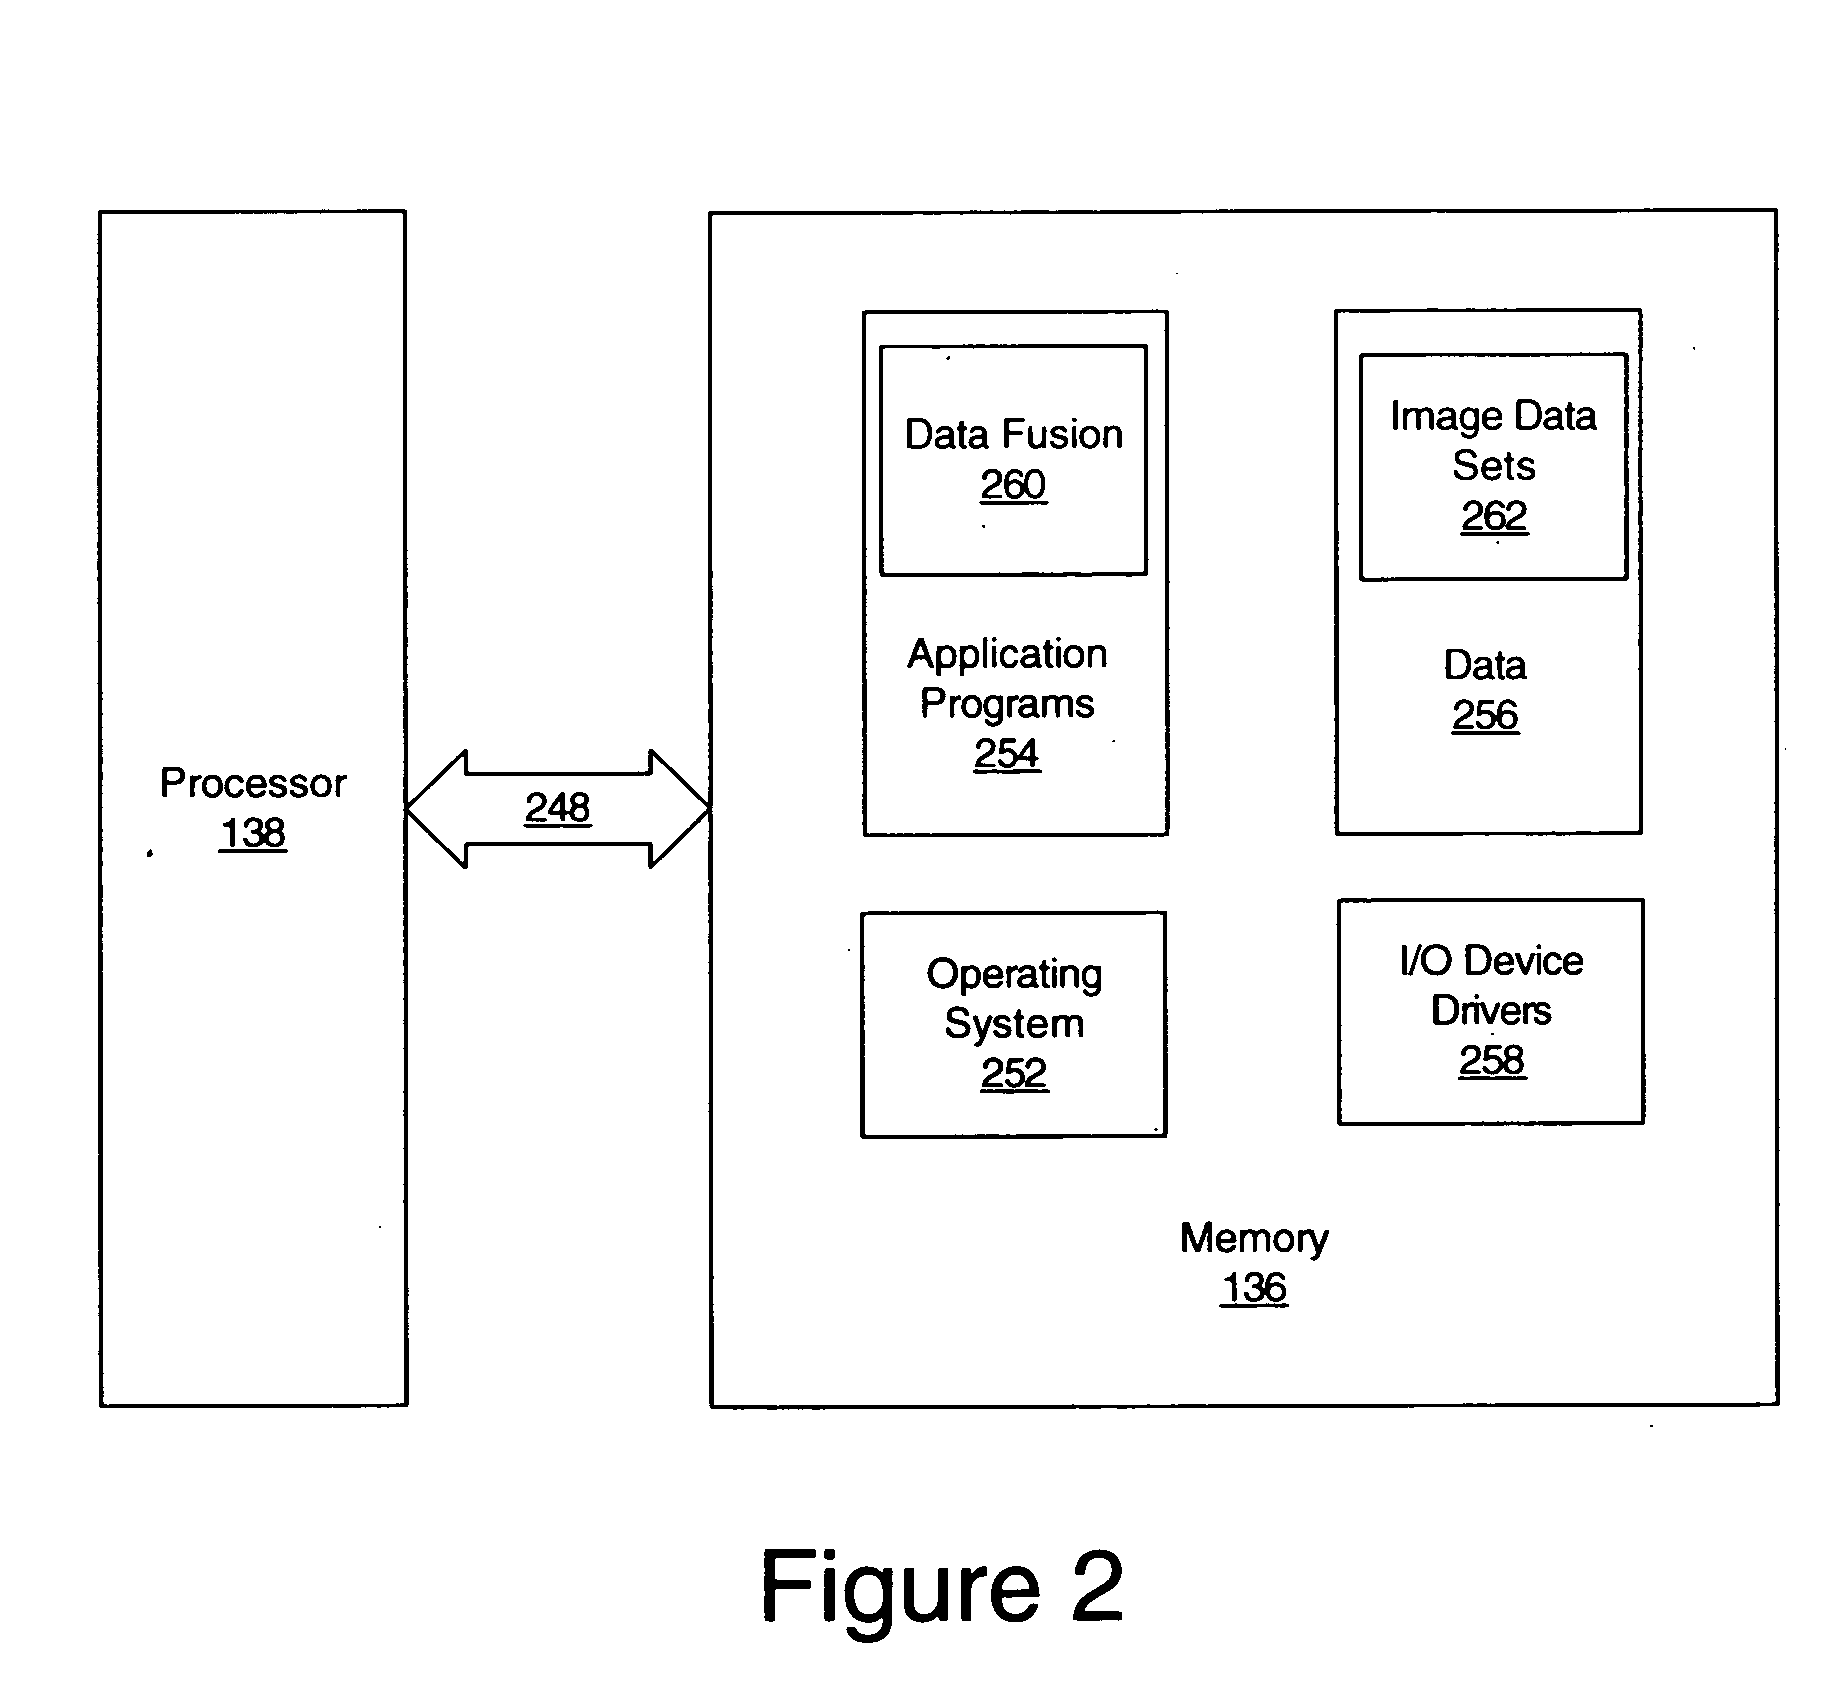 Methods, systems and computer program products for fusion of high spatial resolution imagery with lower spatial resolution imagery using correspondence analysis